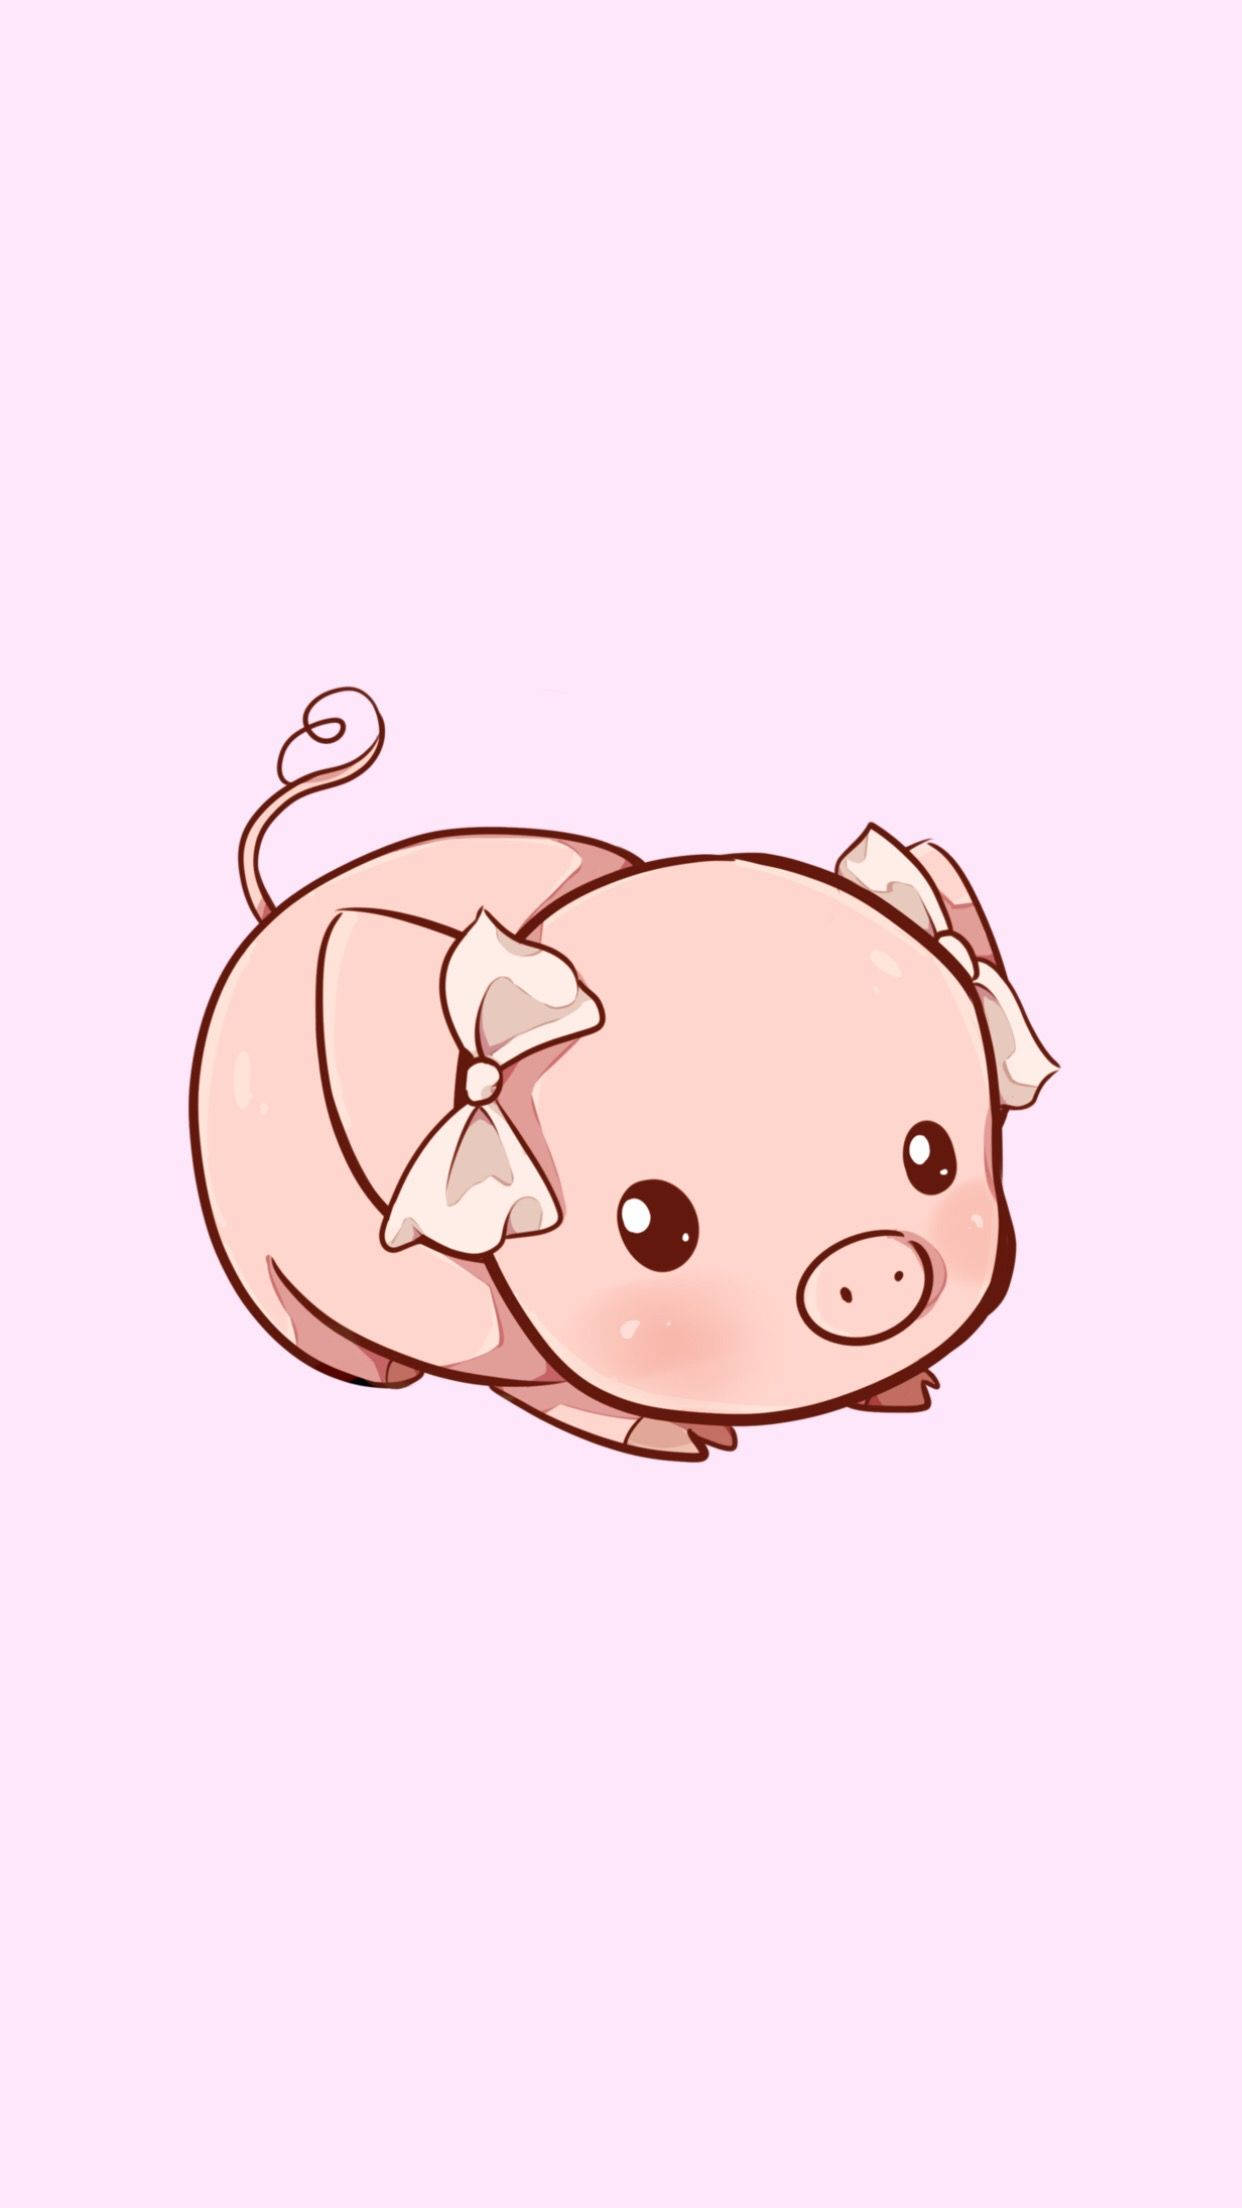 Download Cute Pig With Pink Bow Wallpaper